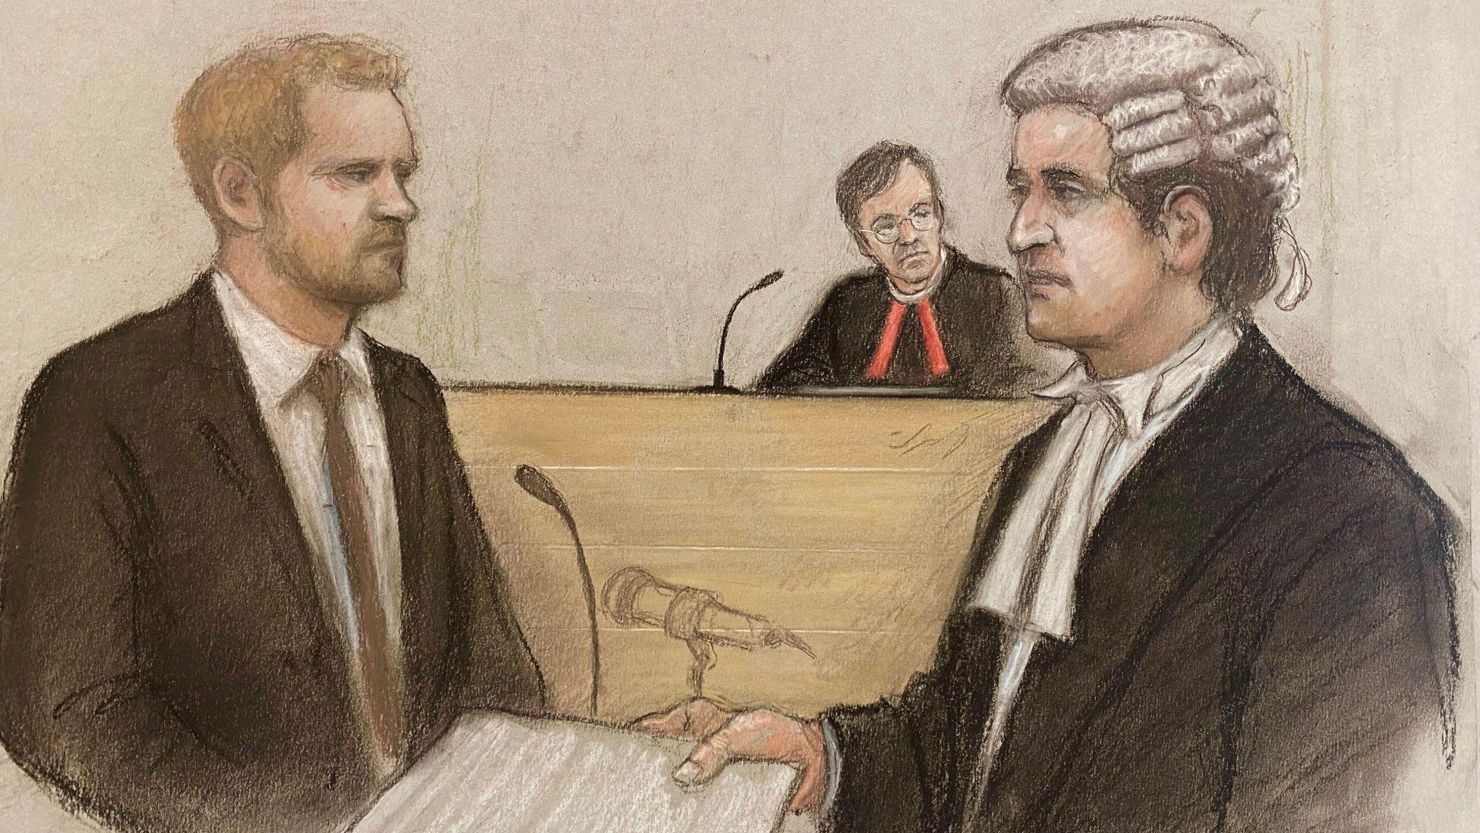 Prince Harry is shown giving evidence in a courtroom sketch on Tuesday.